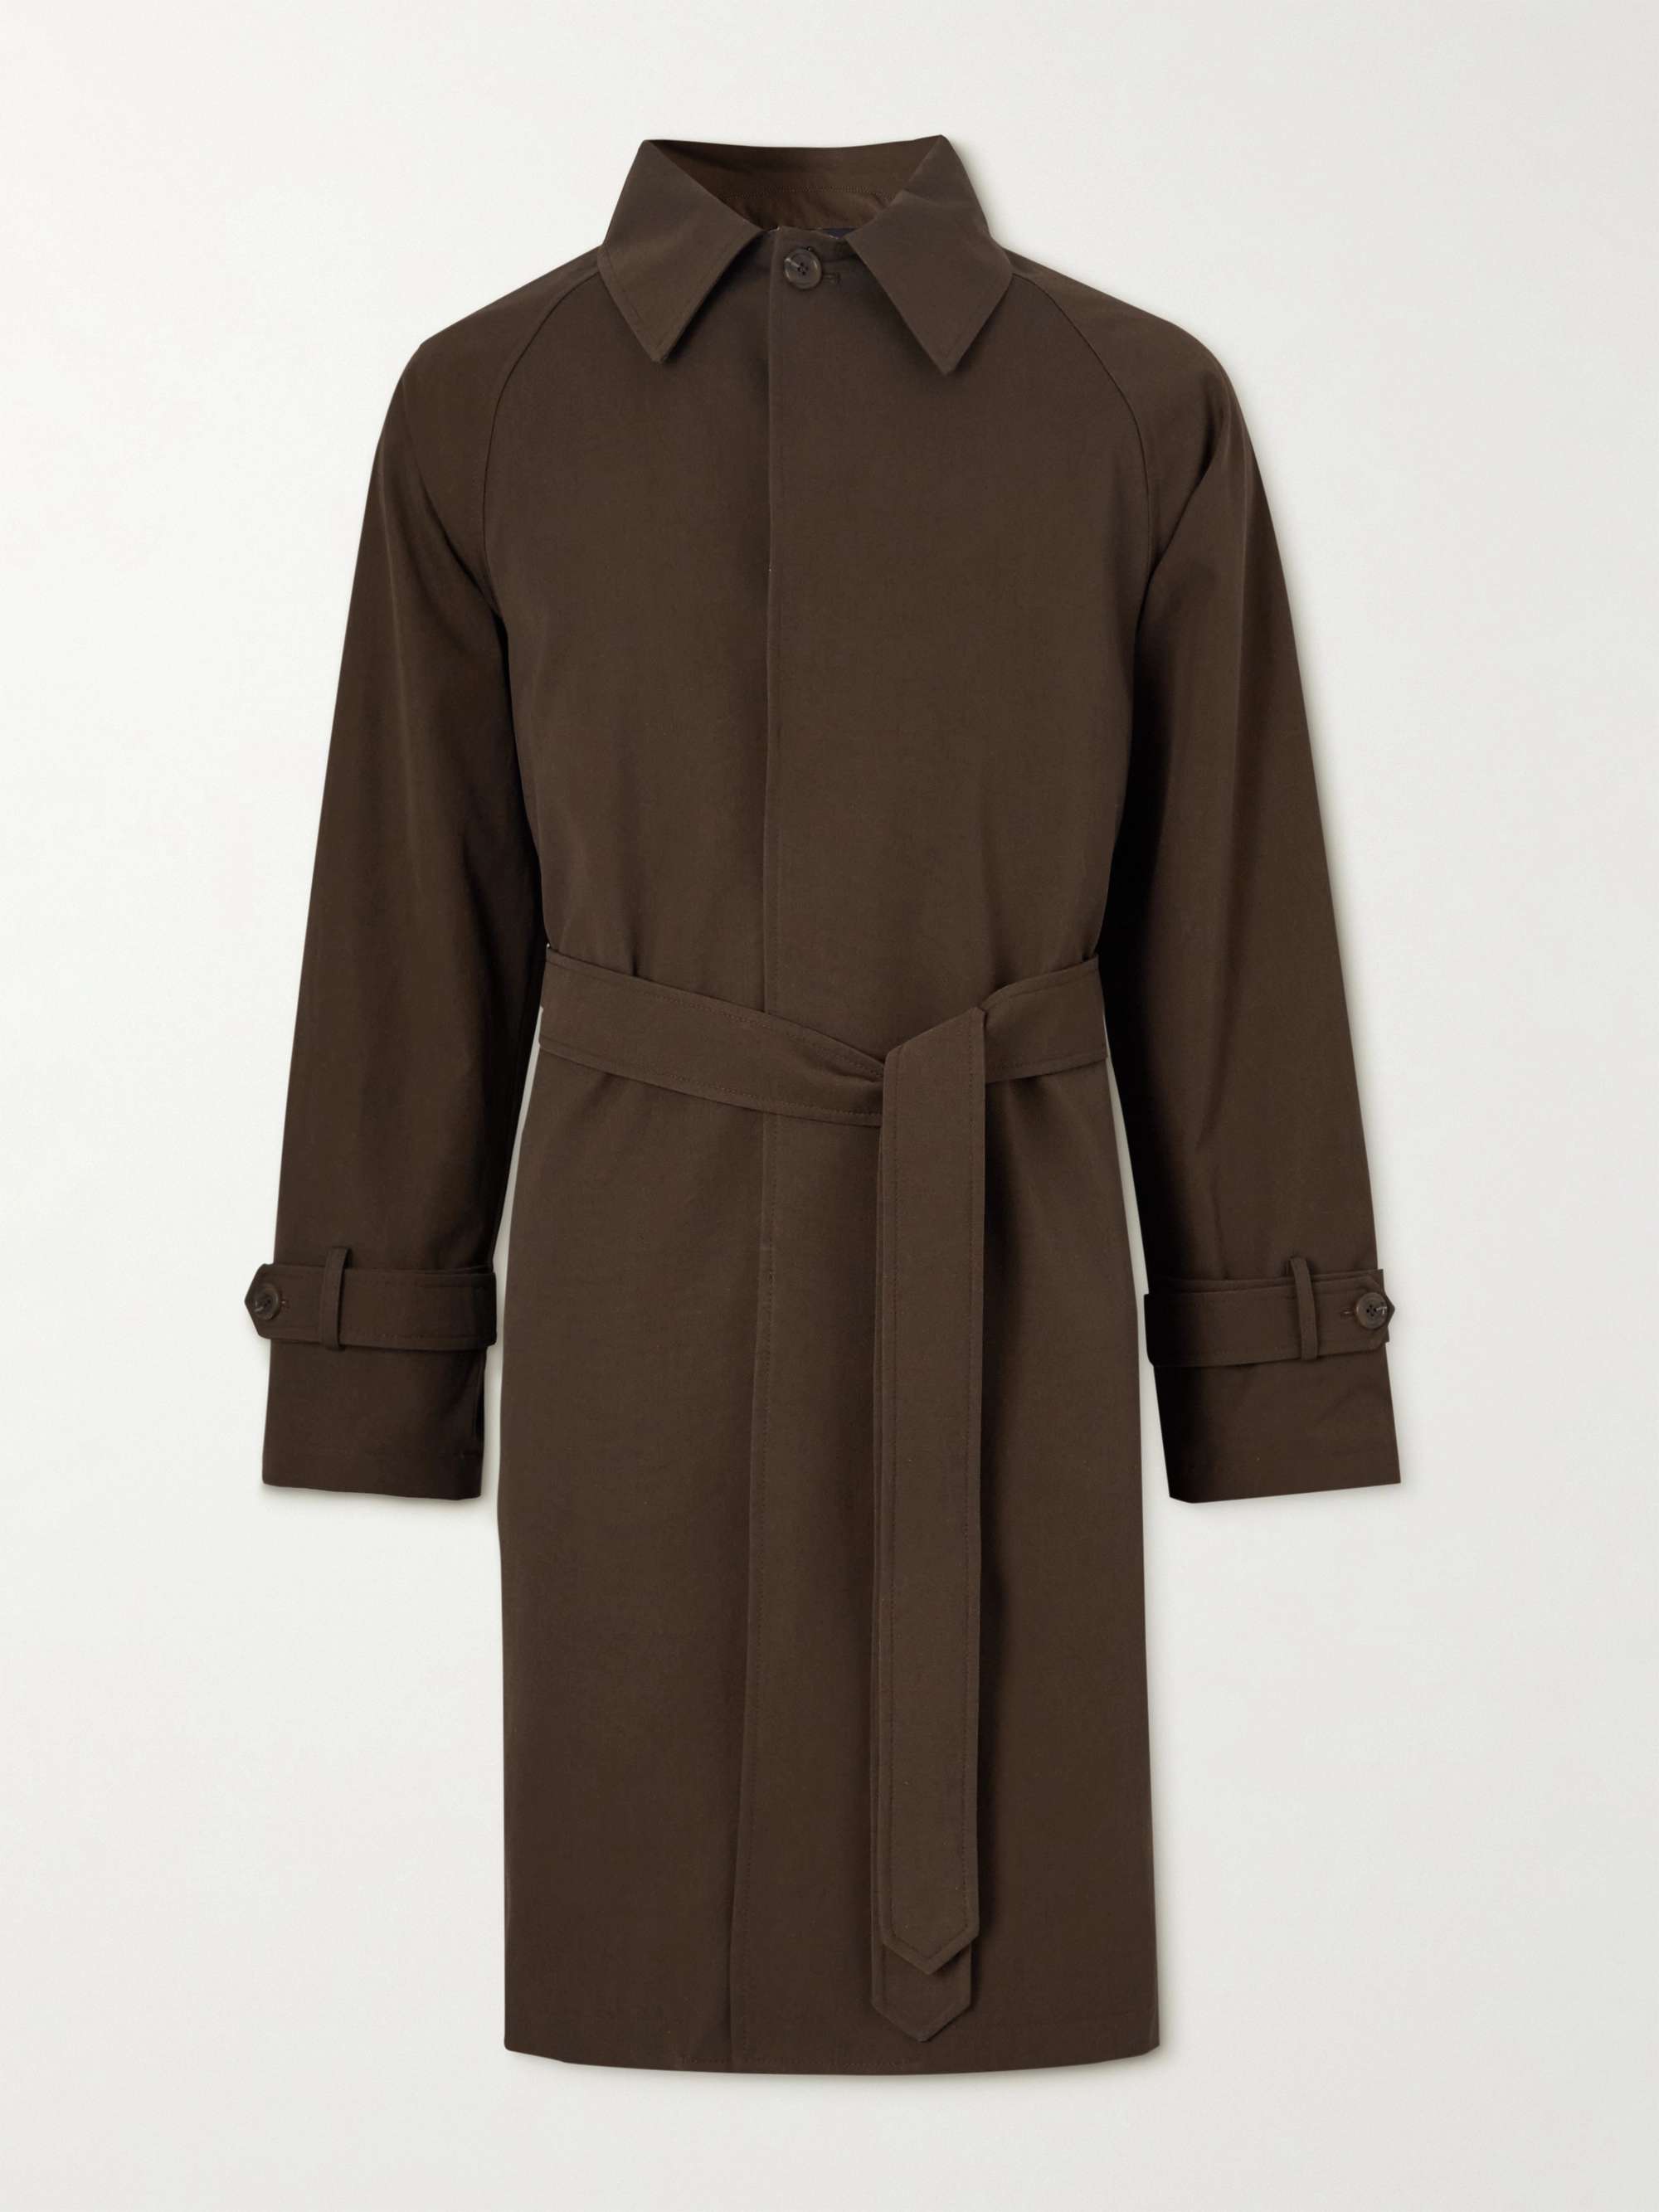 STÒFFA Belted Cotton-Canvas Trench Coat